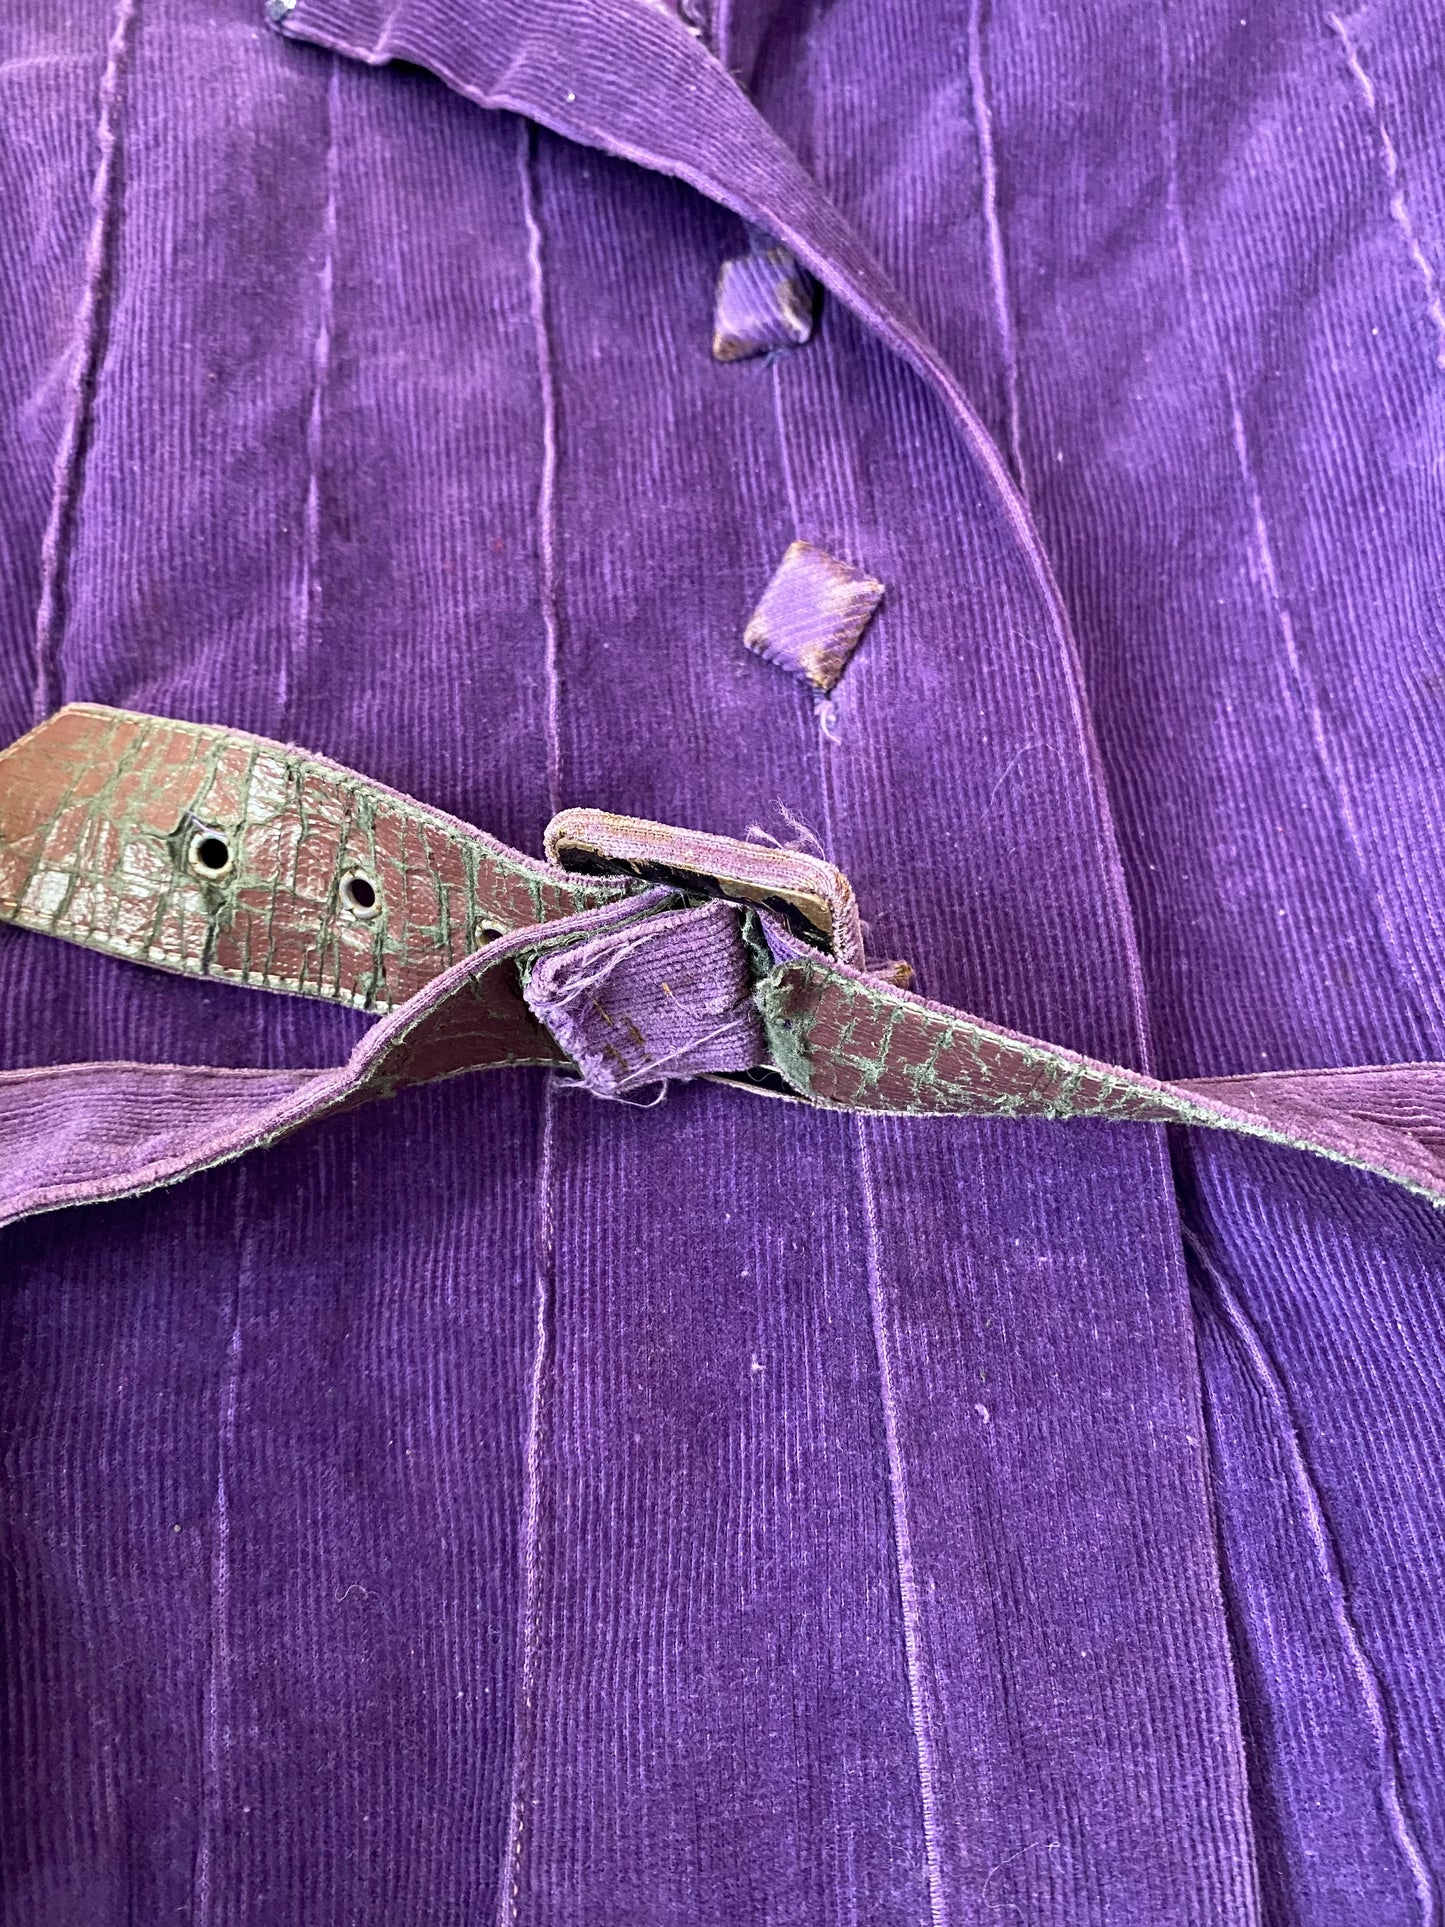 1930s/40s Purple Faded Corduroy Belted Jacket- M/L